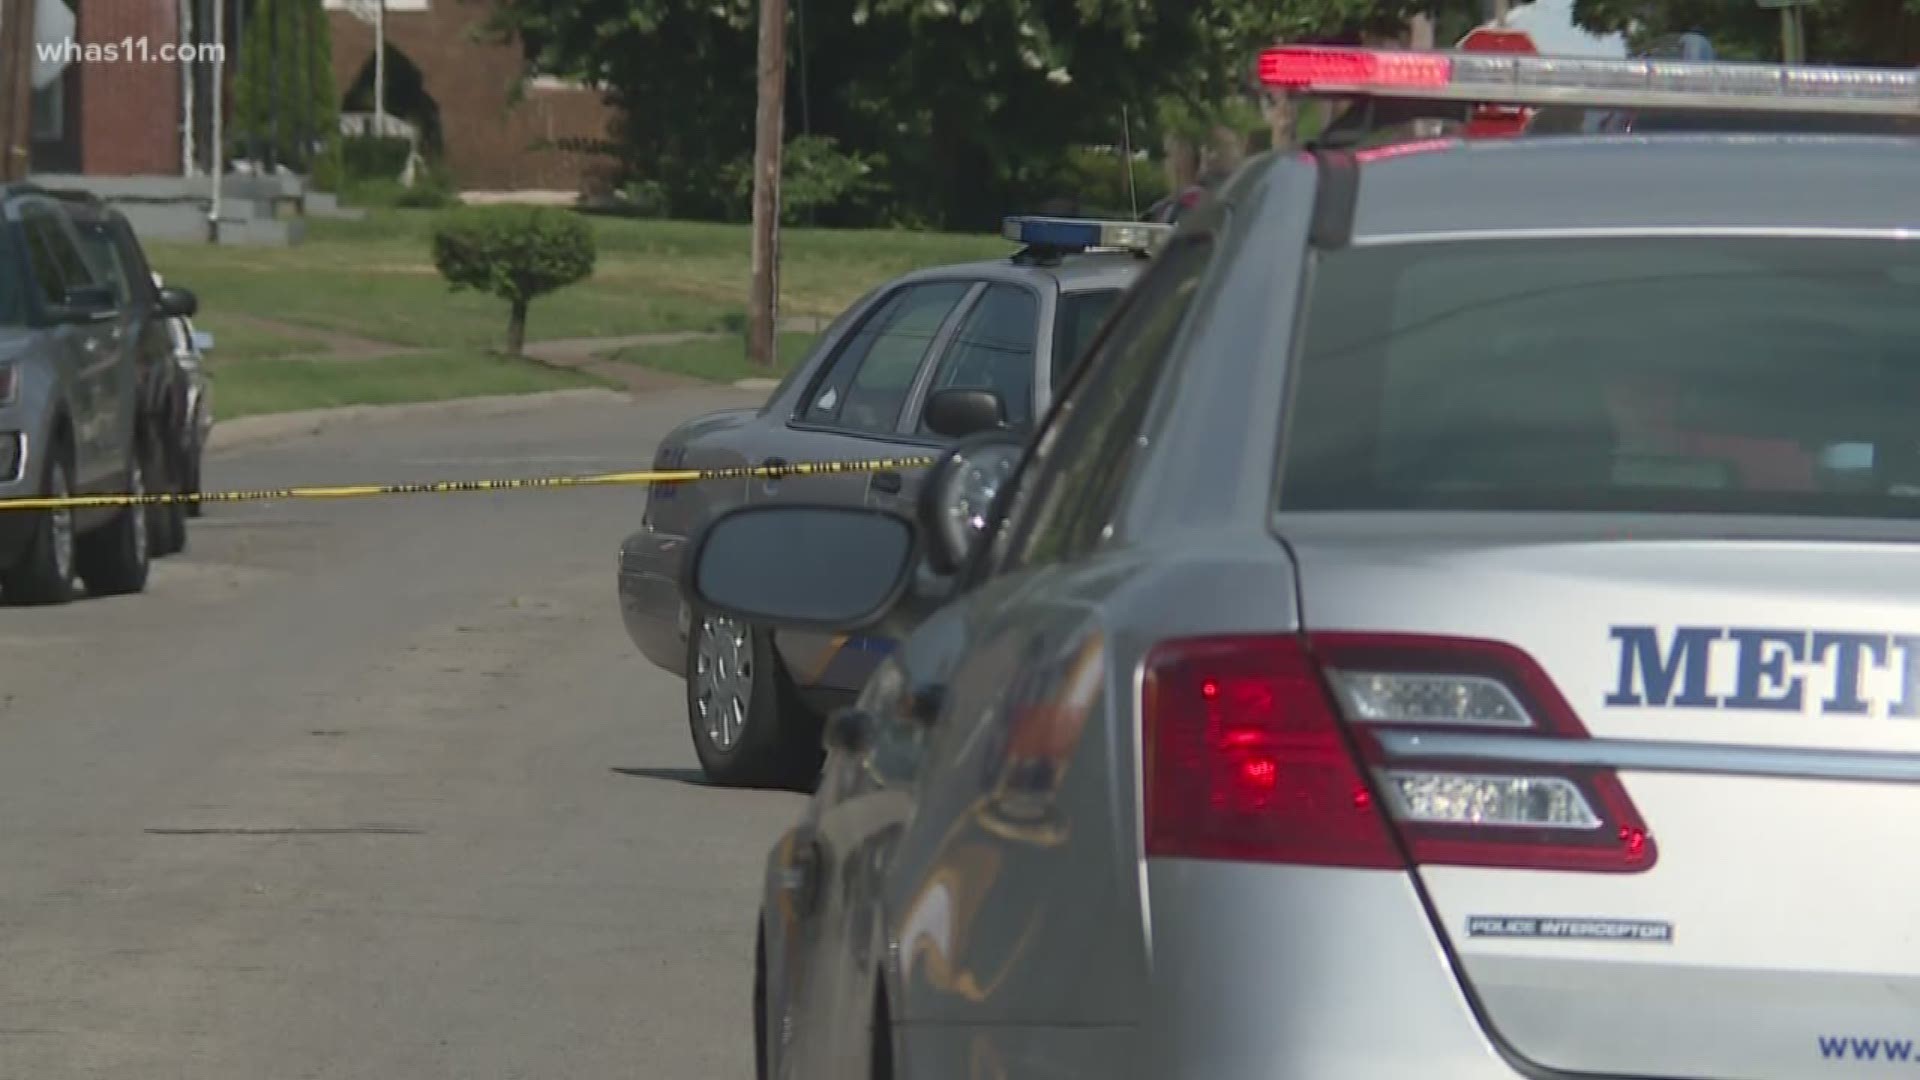 Police are investigating after a person was shot in the Algonquin neighborhood on July 21.